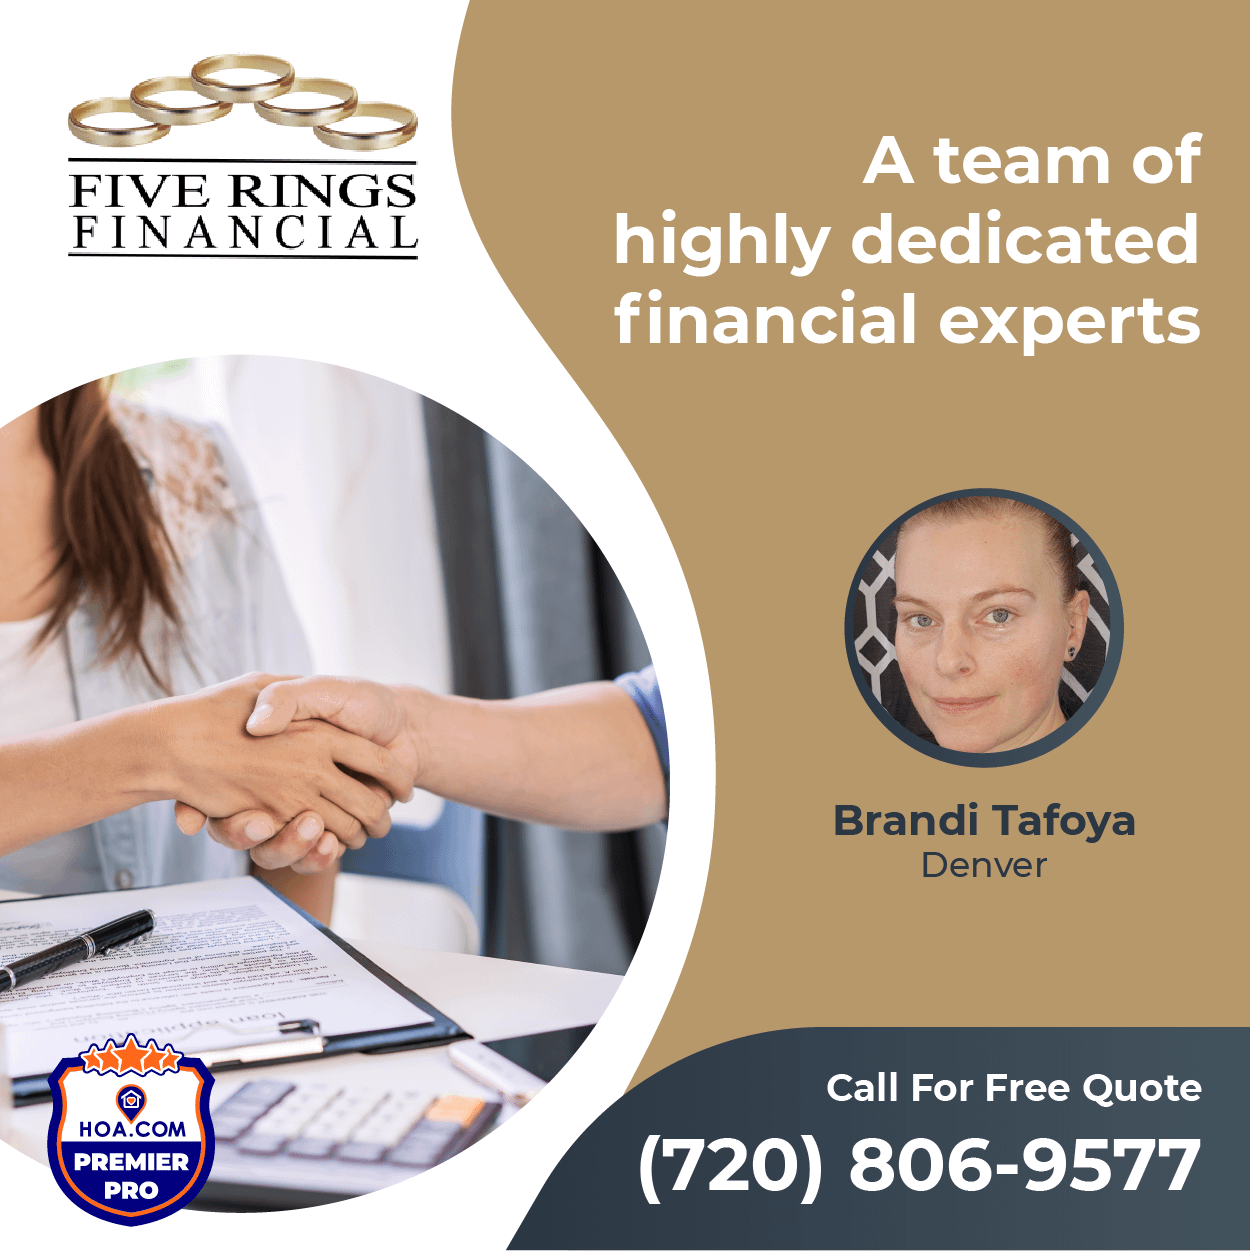 A Team of Highly Dedicated Financial Experts